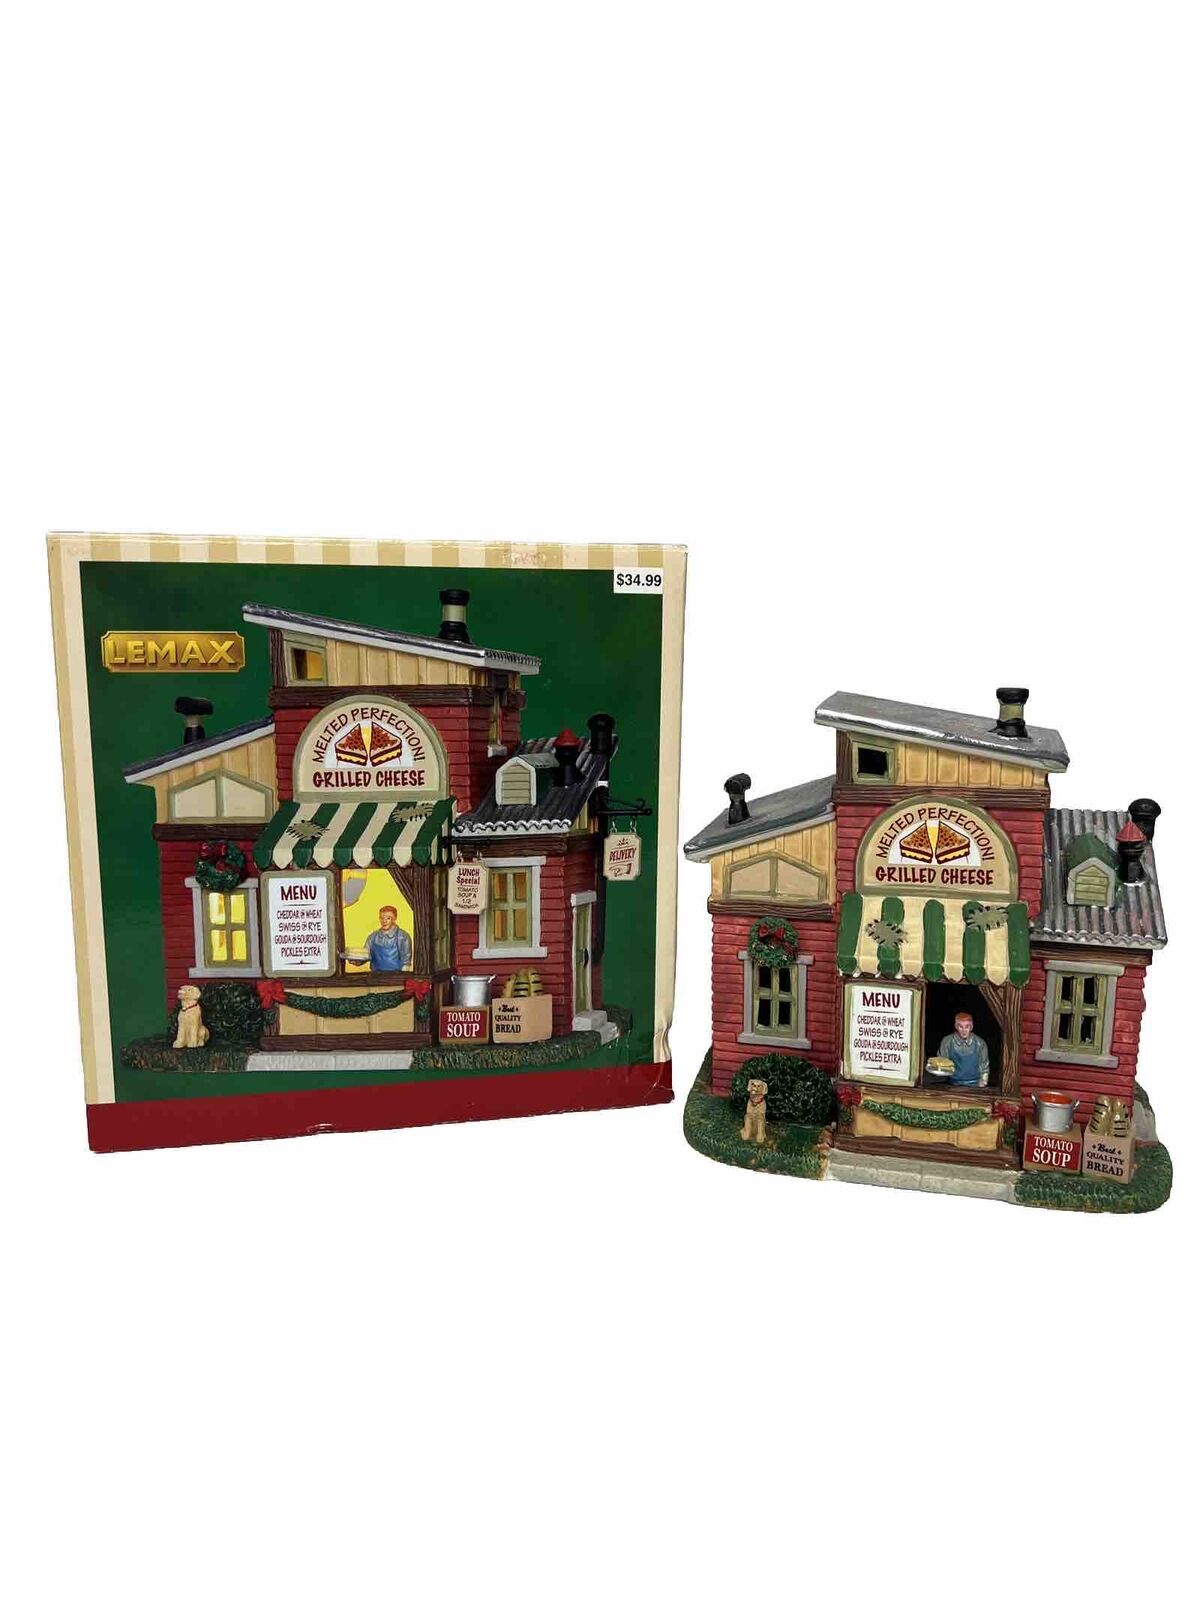 LEMAX Christmas Village Melted Perfection Grilled Cheese Store Lighted Building